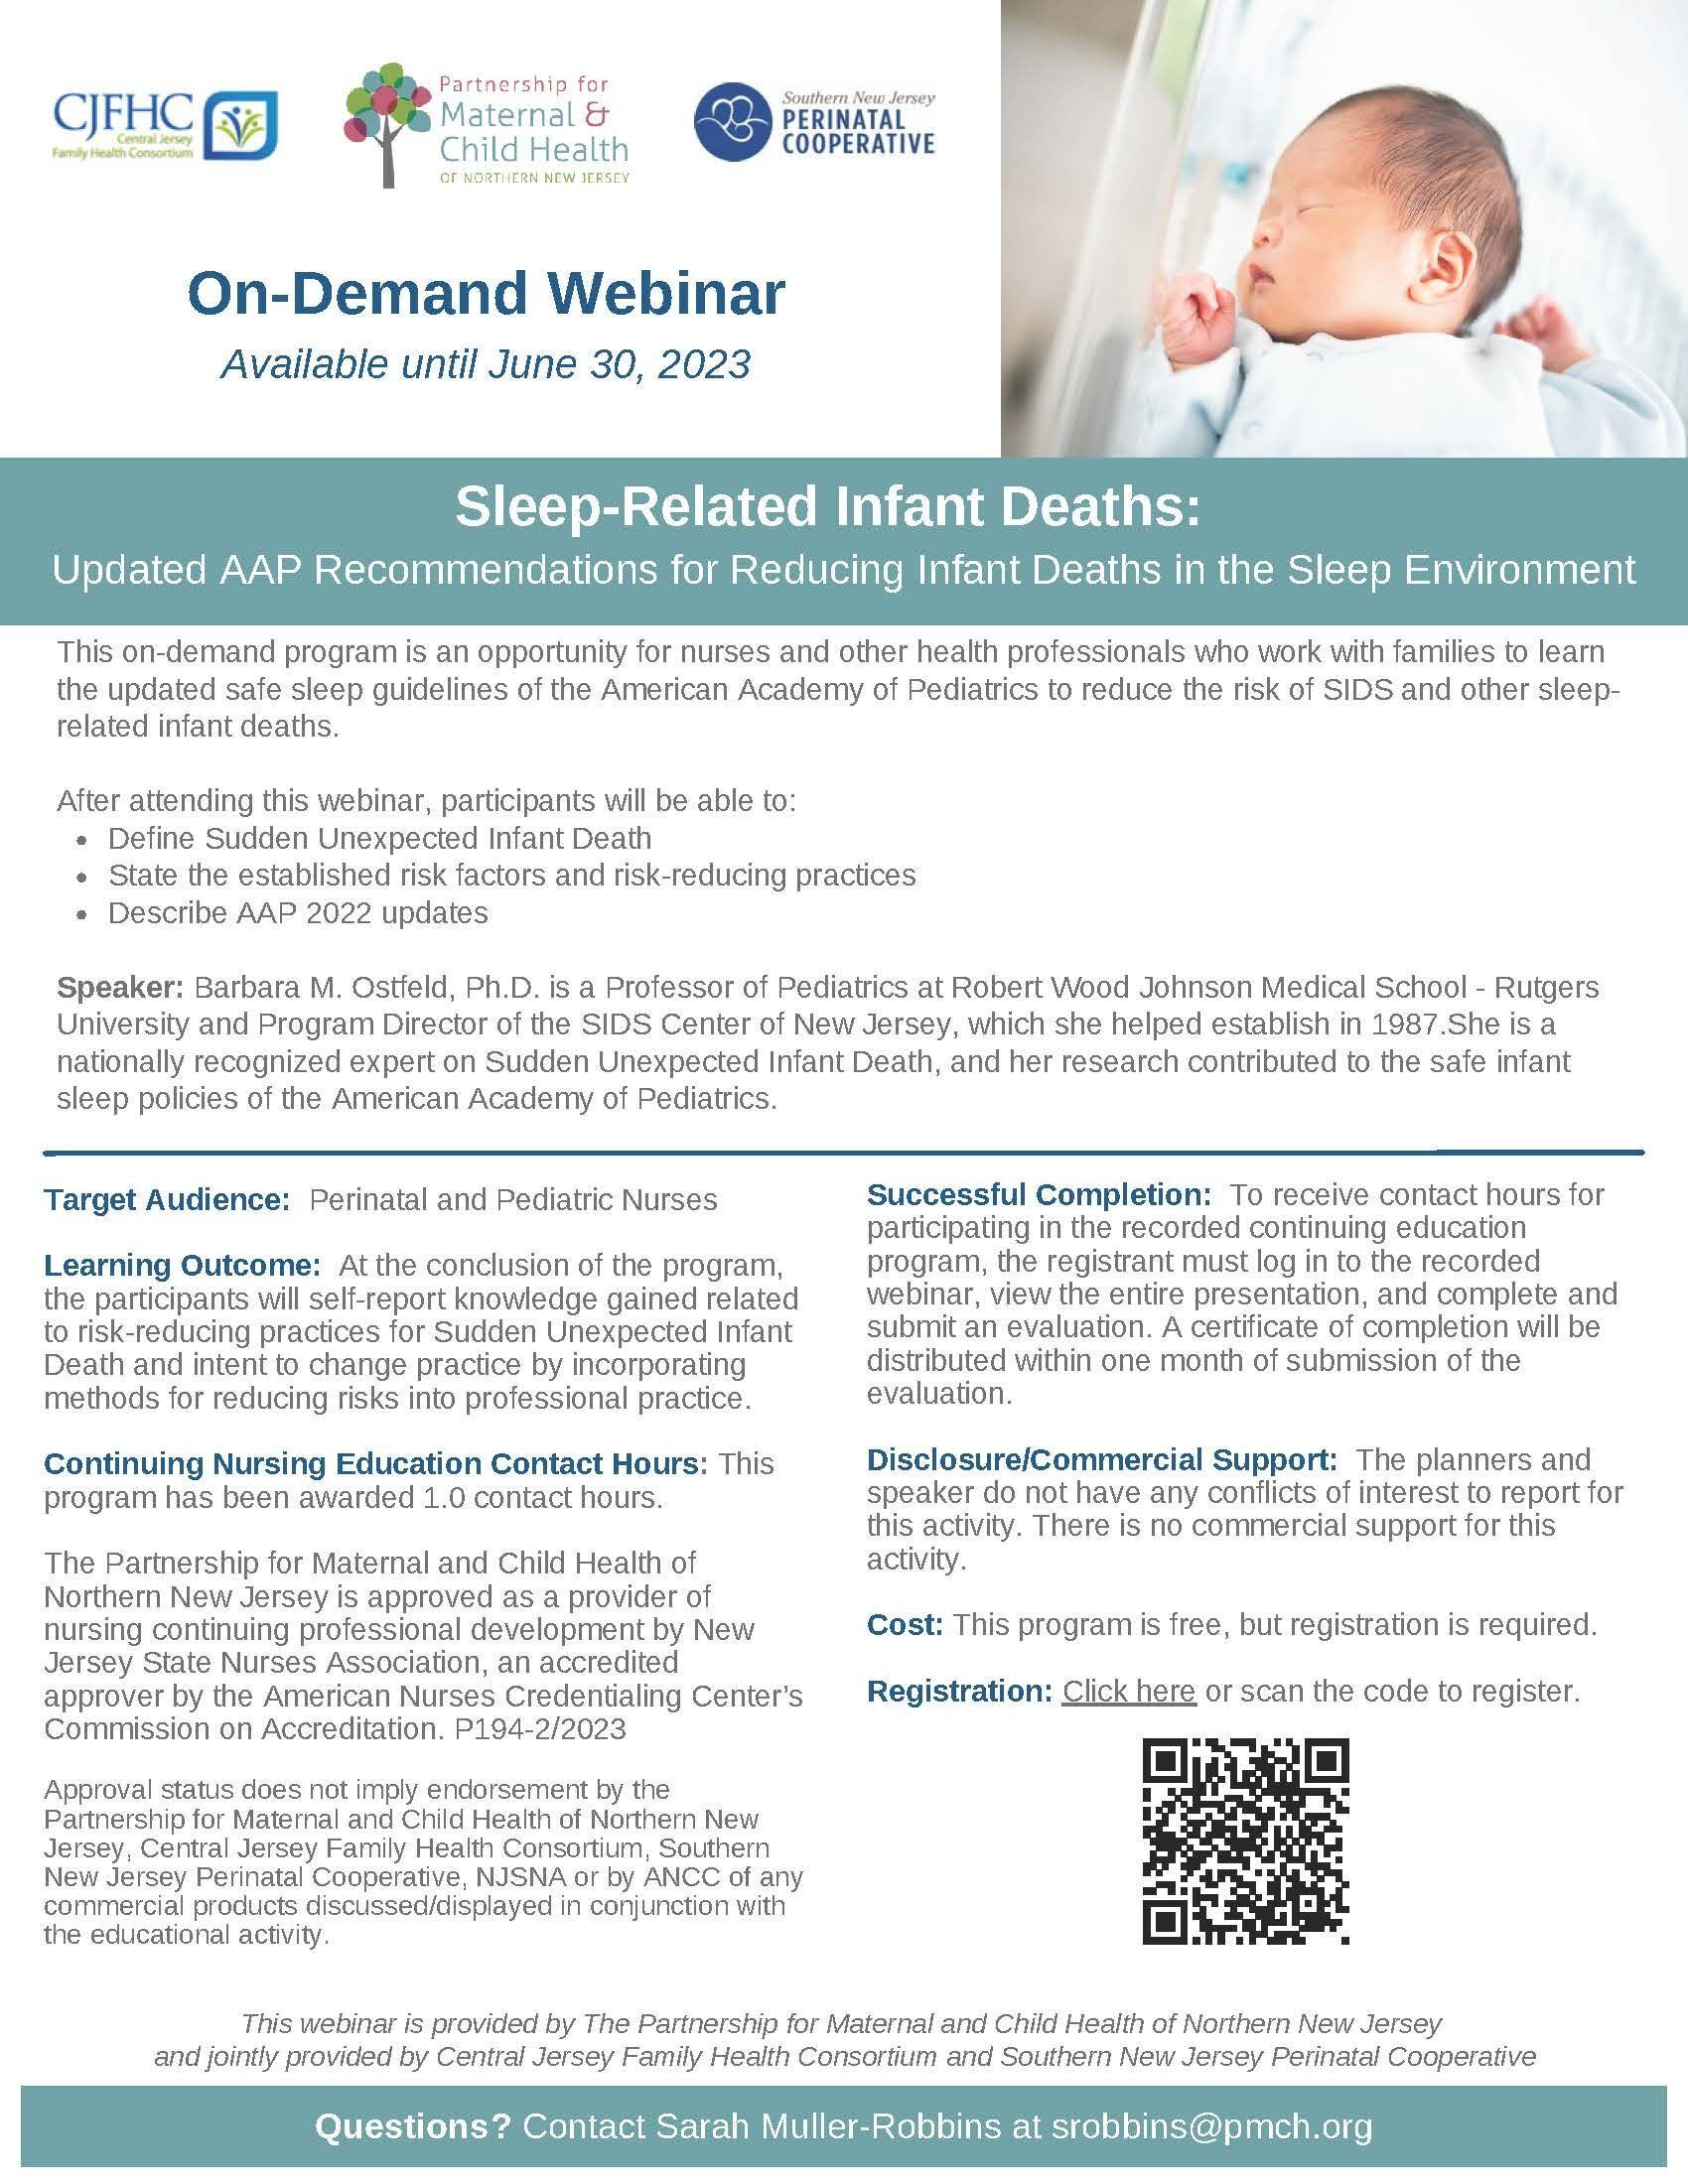 Sleep-Related Infant Deaths: Updated AAP Recommendations for Reducing Infant Deaths in the Sleep Environment